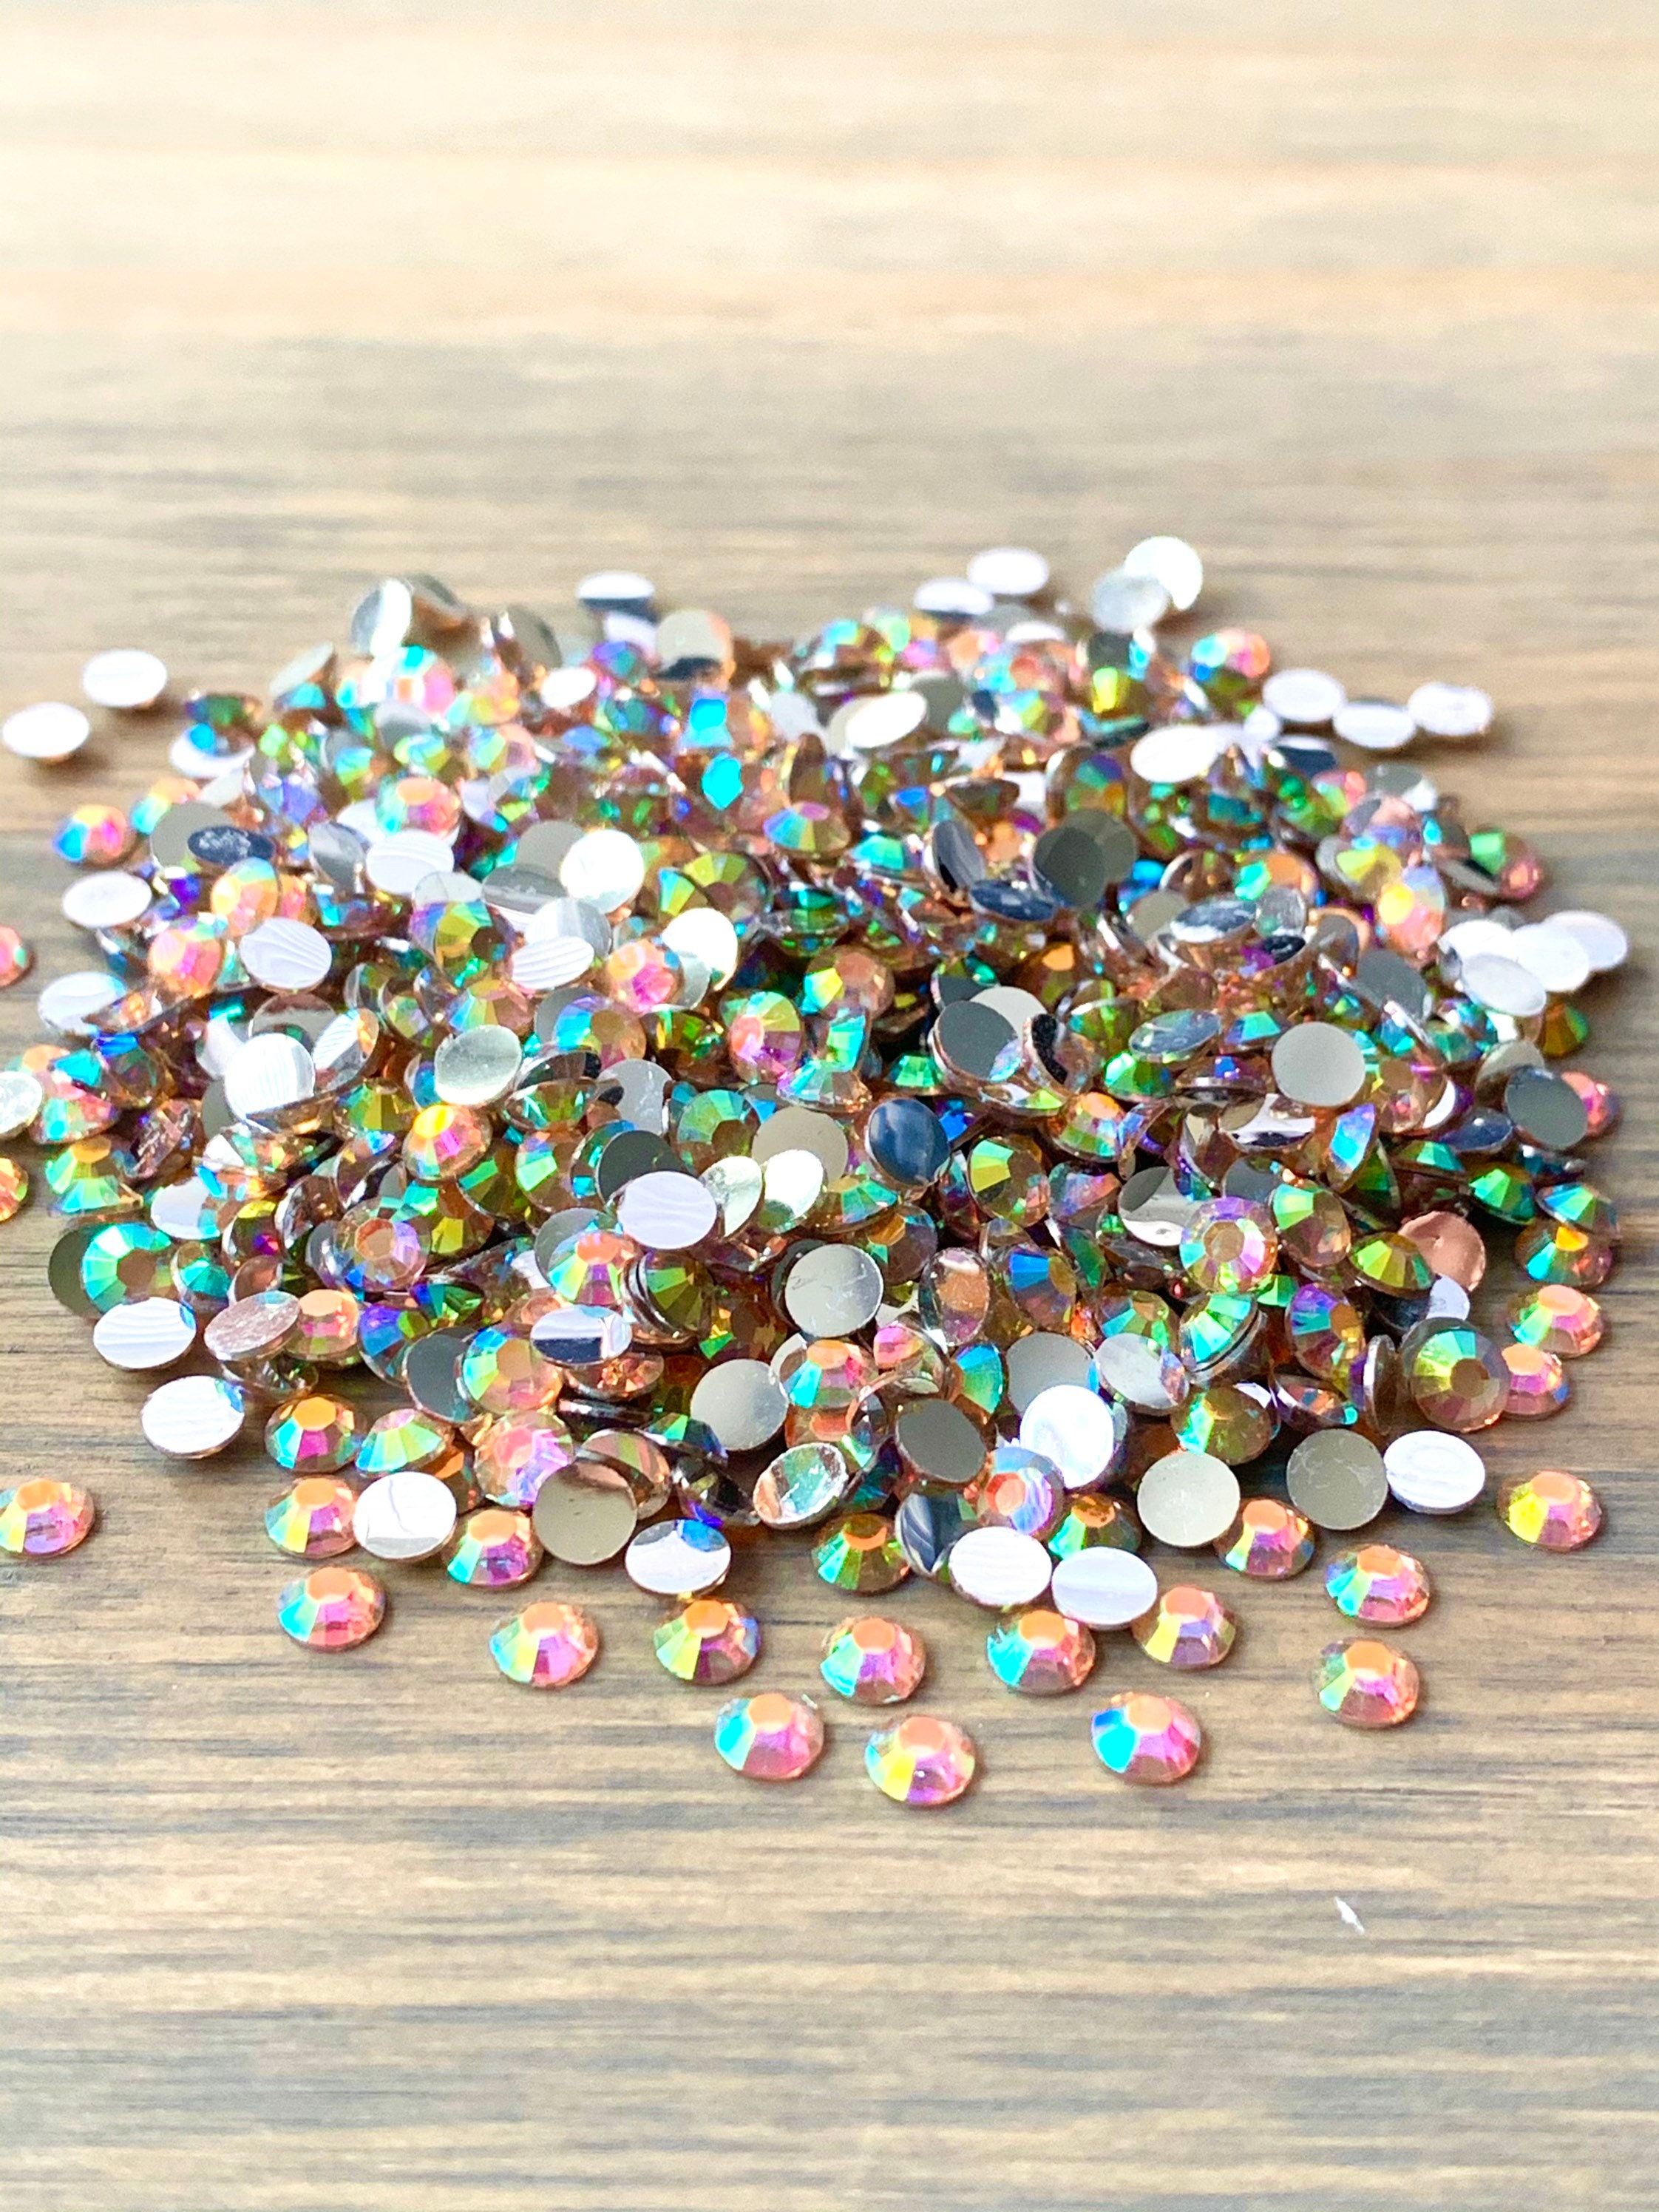 4,500ct OPAQUE Green Jelly Resin Rhinestones Bulk Wholesale Non Hotfix Non  AB Coated Flatback 3MM, 4MM, 5MM, Ships From USA 